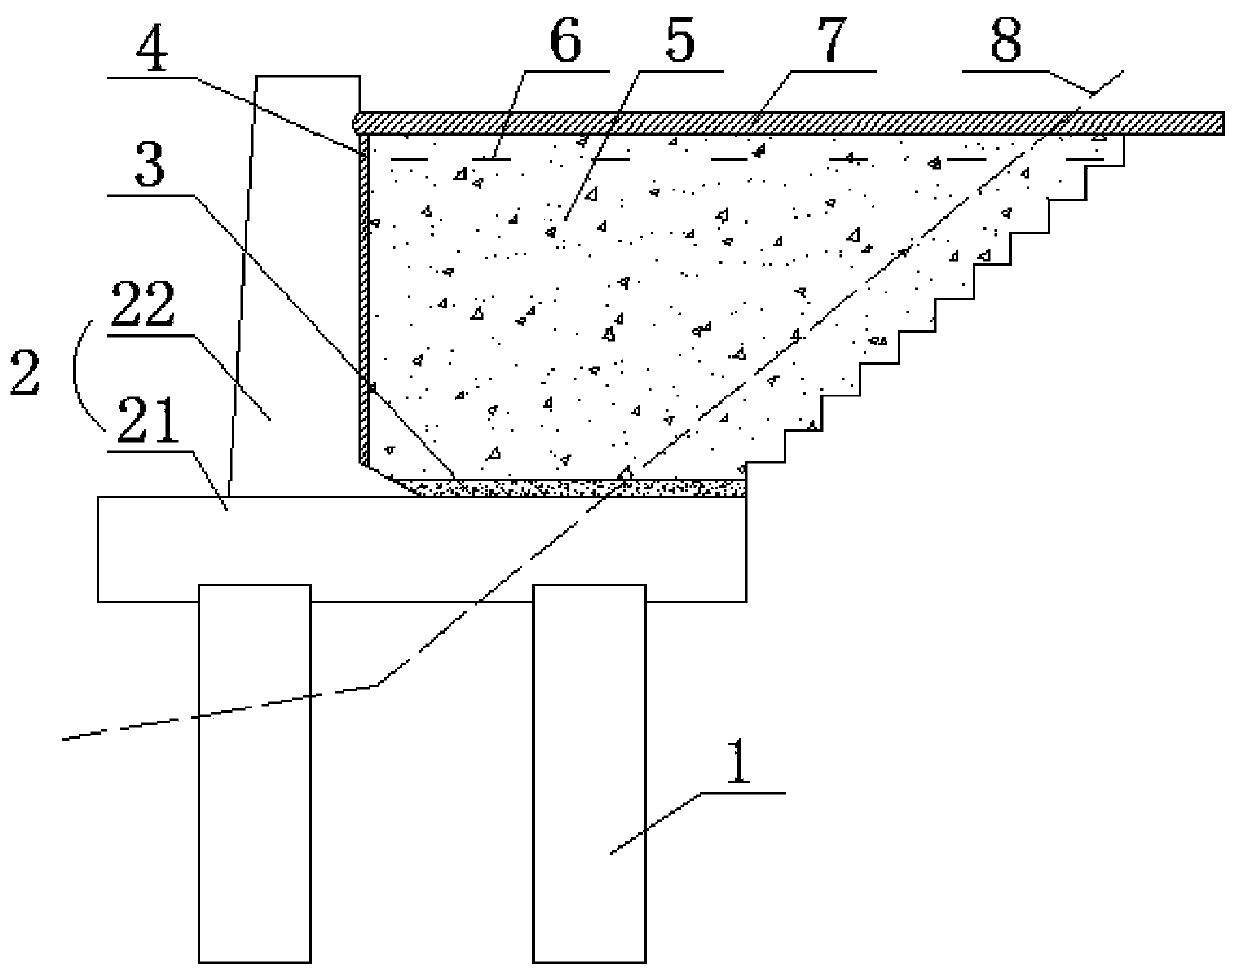 Novel anti-seismic retaining backfilling composite structure